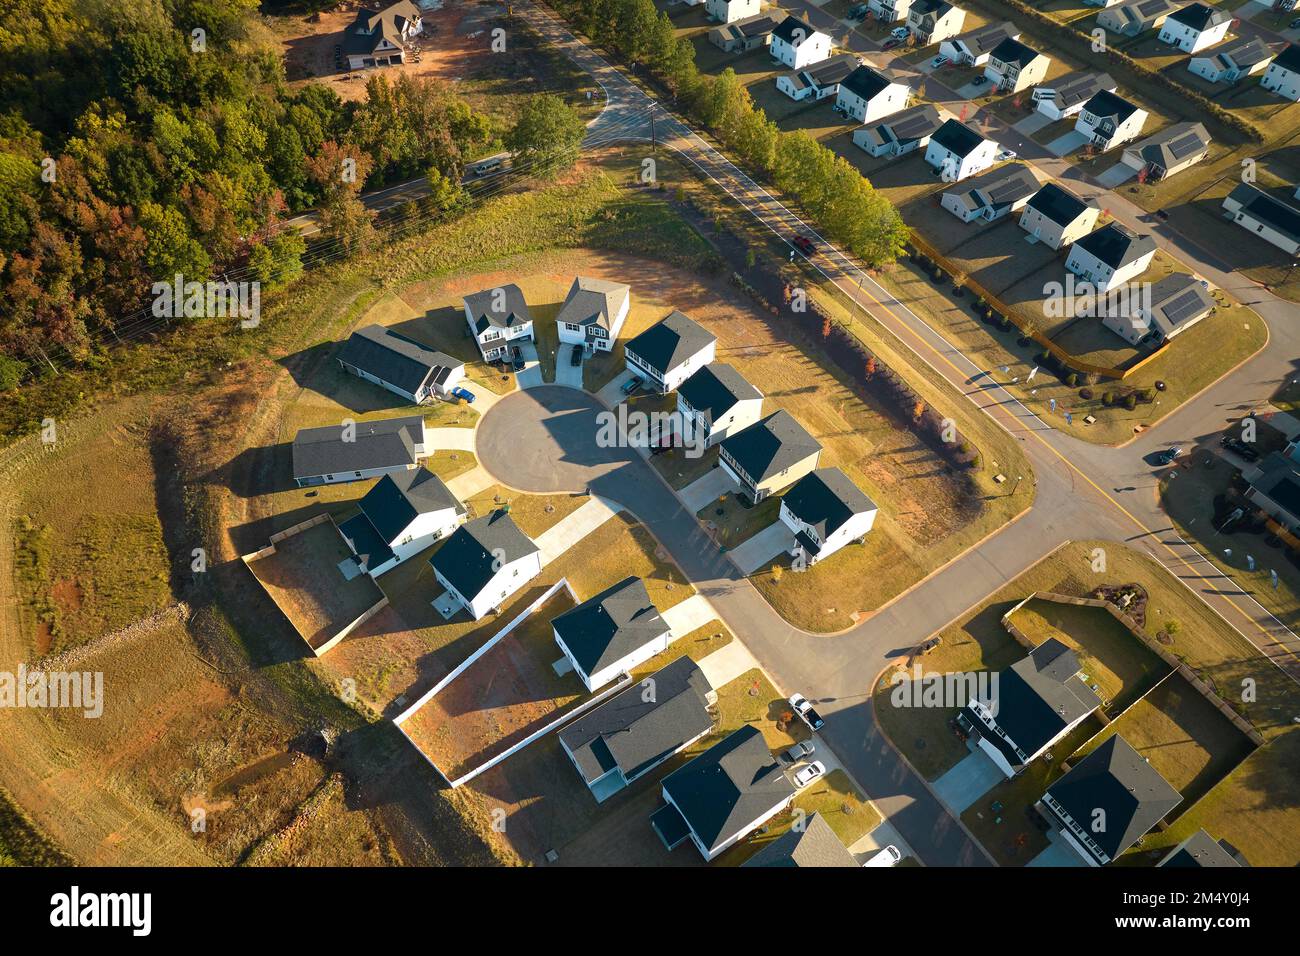 Aerial view of cul-de-sac at neighborhood street dead end with tightly packed homes in South Carolina living aeria. Family houses as example of real e Stock Photo